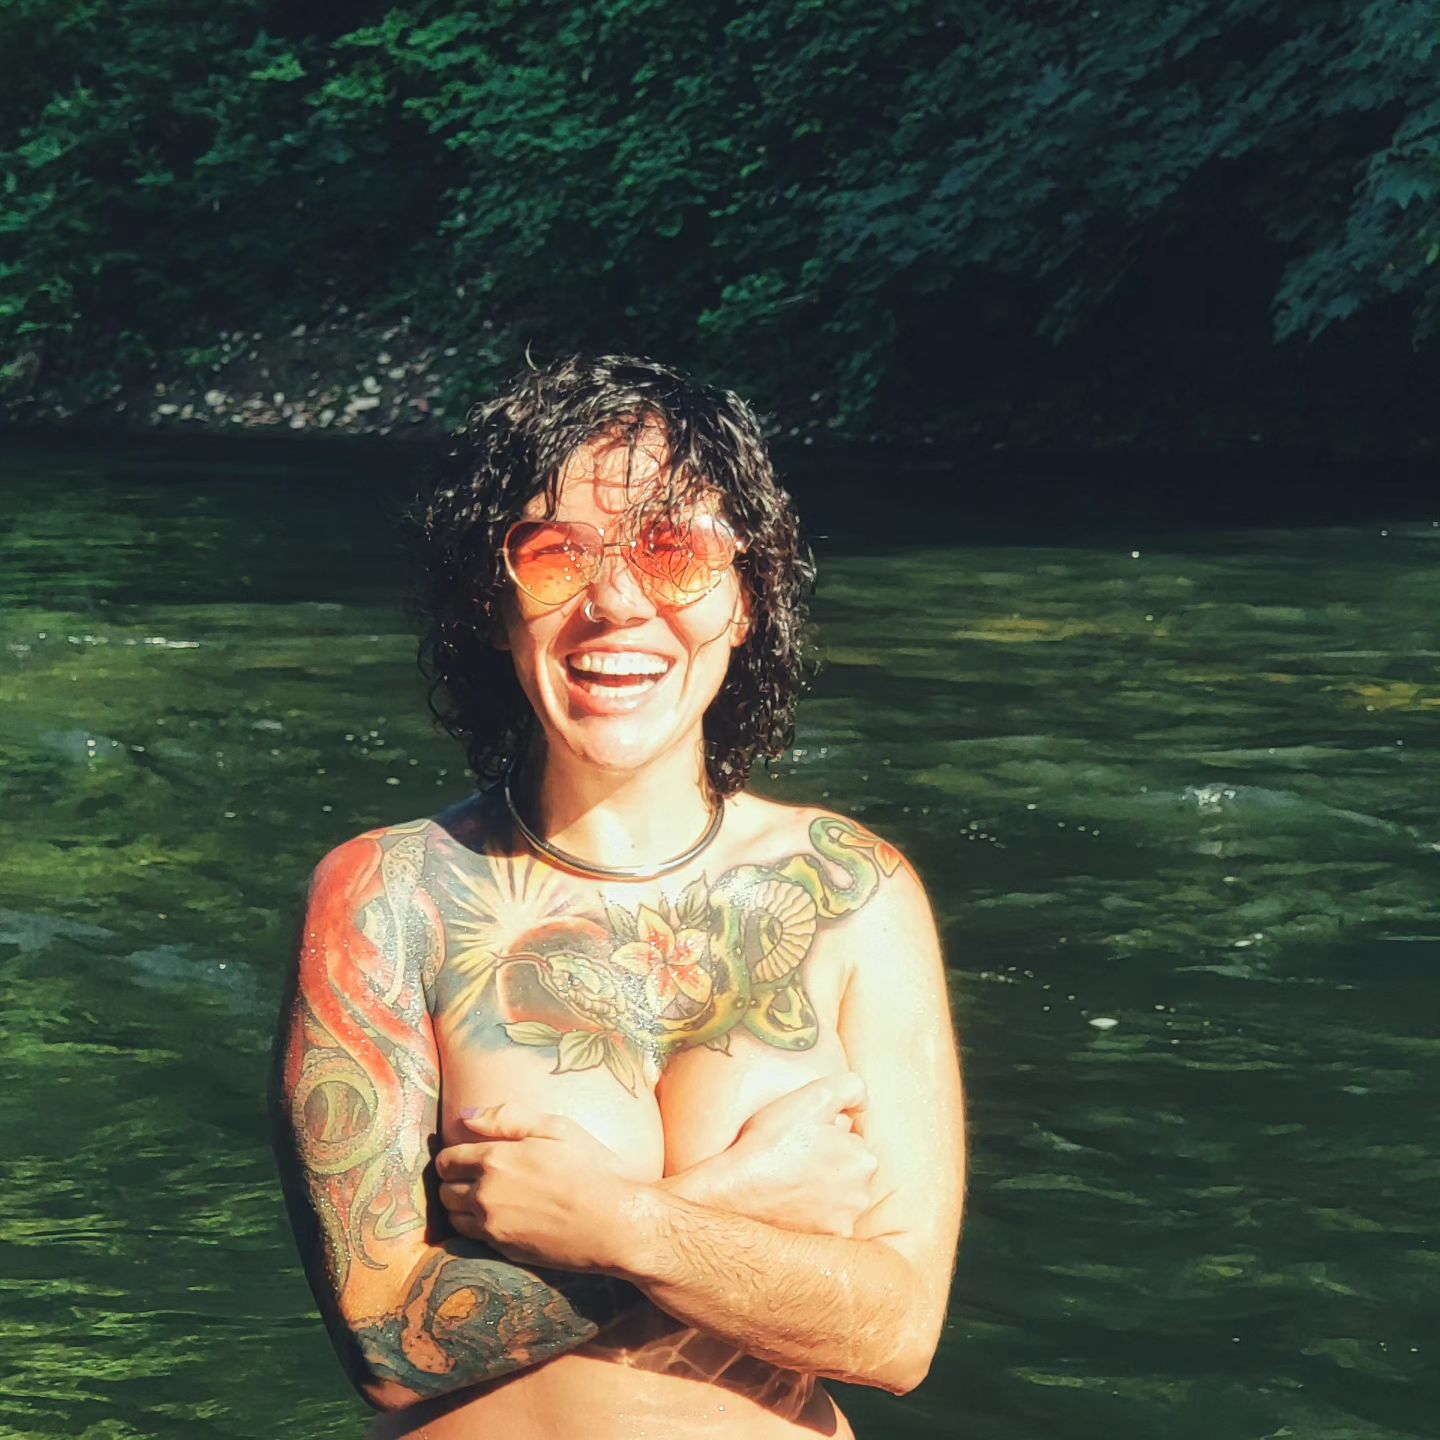 Went on a big adventure to visit a historic bridge and pick fresh blackberries yesterday and decided to indulge in a plunge into the brrrrisk river. More 🔞📸 on my fan site!

#pnwonderland #pnwgirl #skinnydipping #riverrat #adventuregirl #dateideas #loveyourbody #outdoorwomen #tattoosleeve #tattoogirl #sillygirl #riverbed #coldplunge #wimhof #breathwork #tantra #somaticawareness #sensualphoto #sensoryplay #sensorymeditation #creator #streamersofinstagram